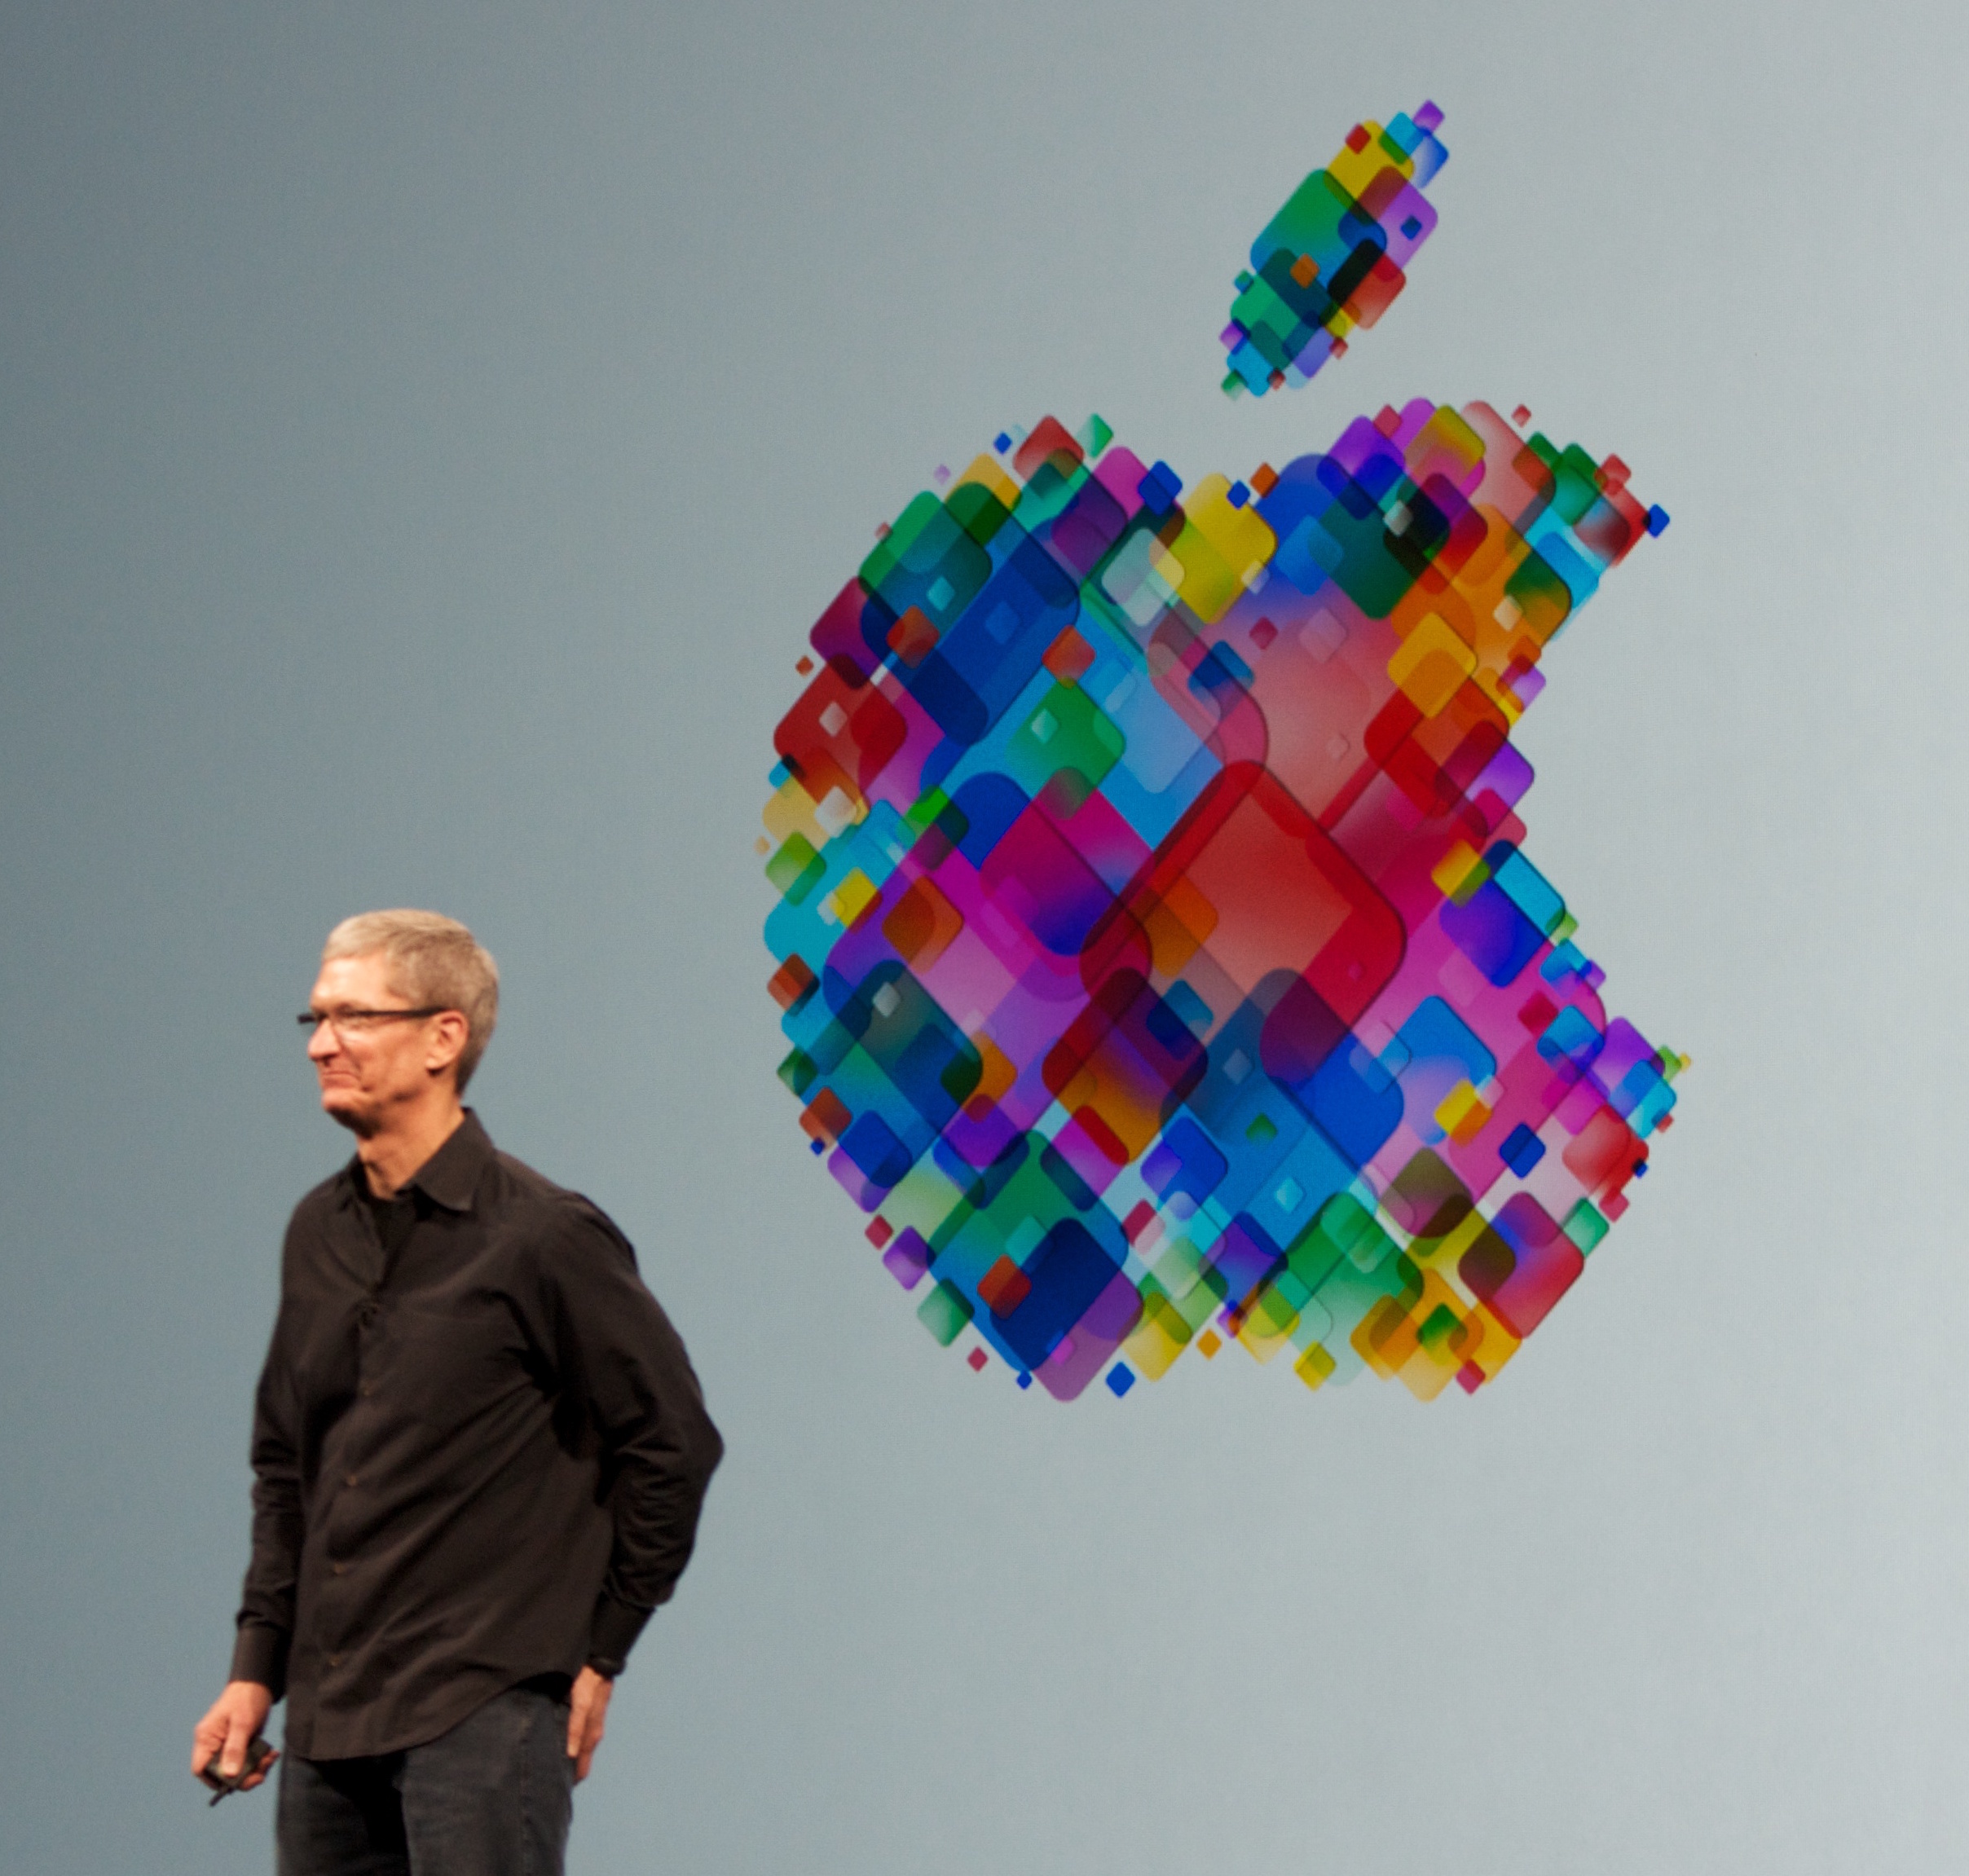 Apple to open first retail store in India next year, Tim Cook says